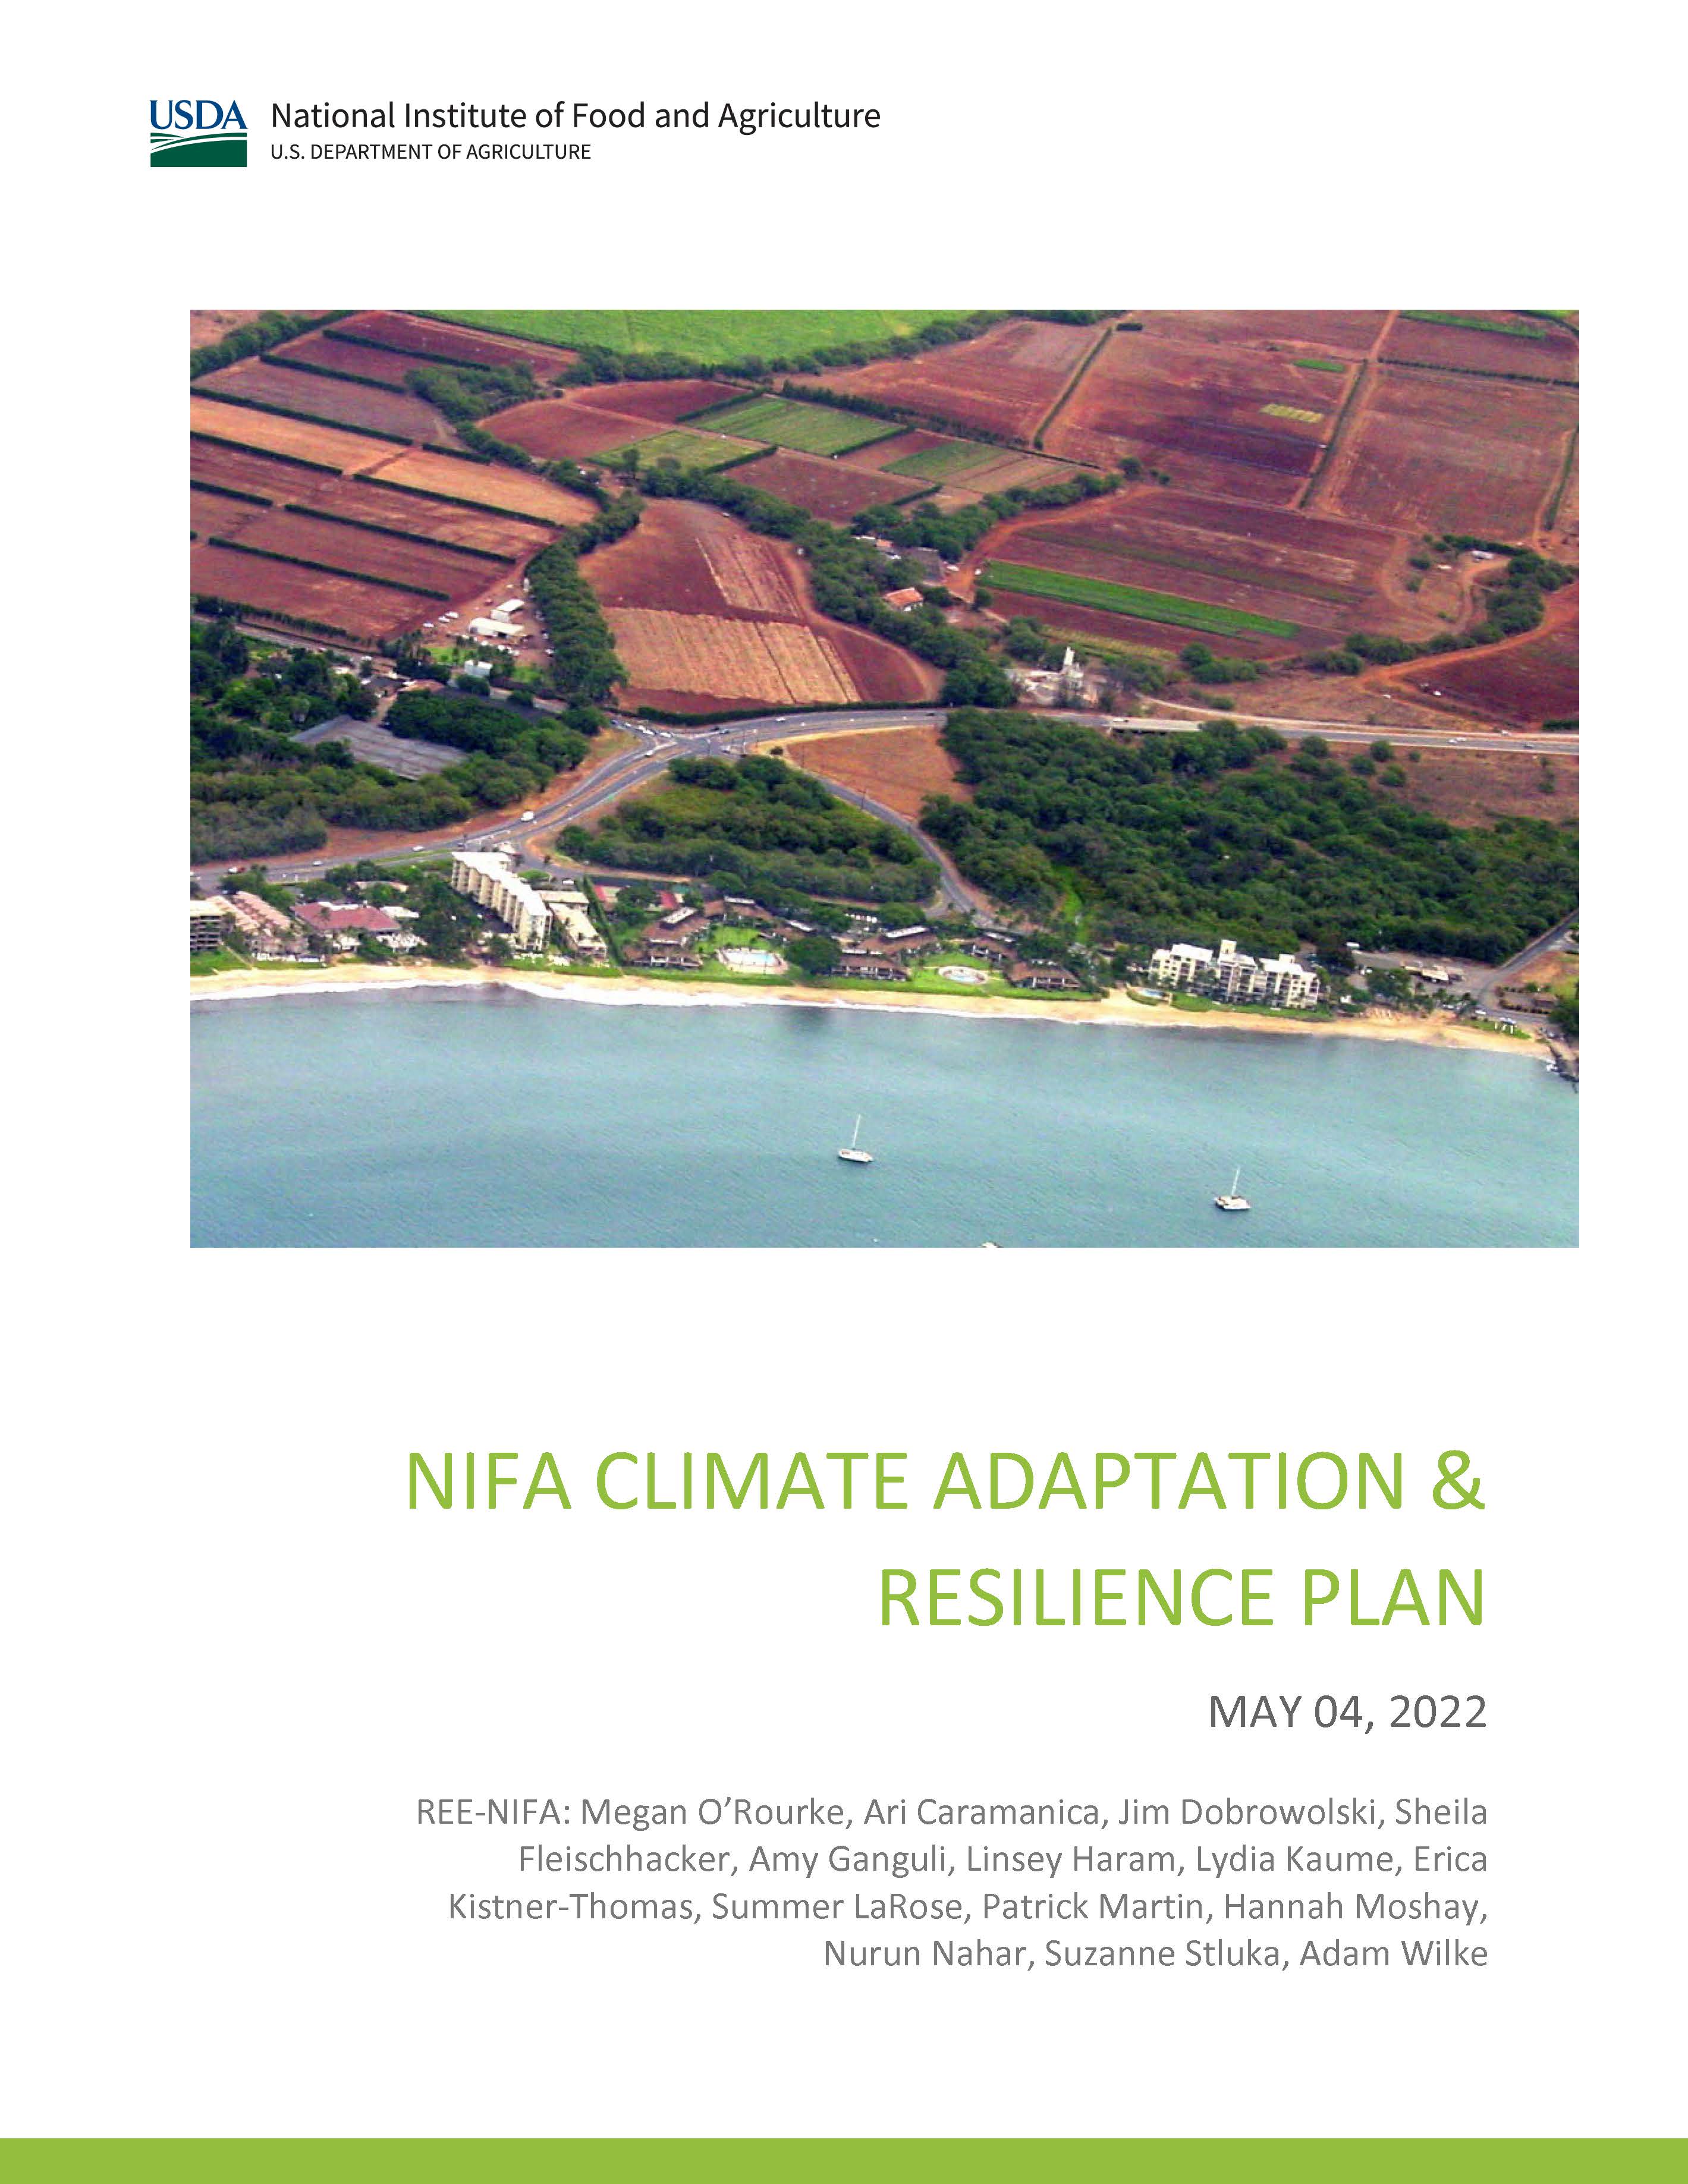 Cover page for the 2022 NIFA Action Plan for Climate Adaptation and Resilience, aerial view of fields by a shore.